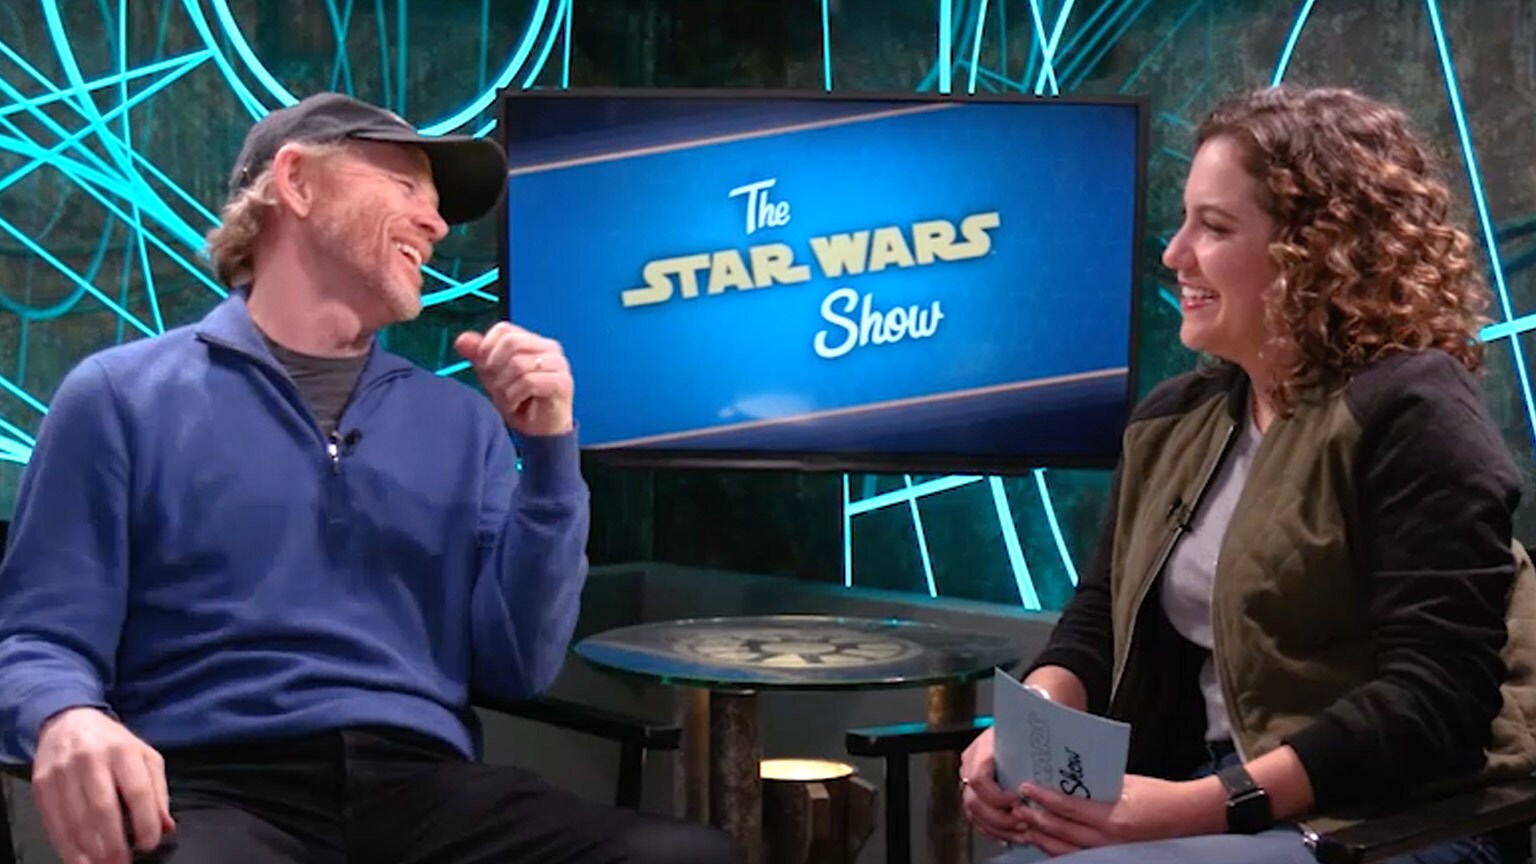 Ron Howard Discusses the Forces that Shape Han in Solo: A Star Wars Story on The Star Wars Show